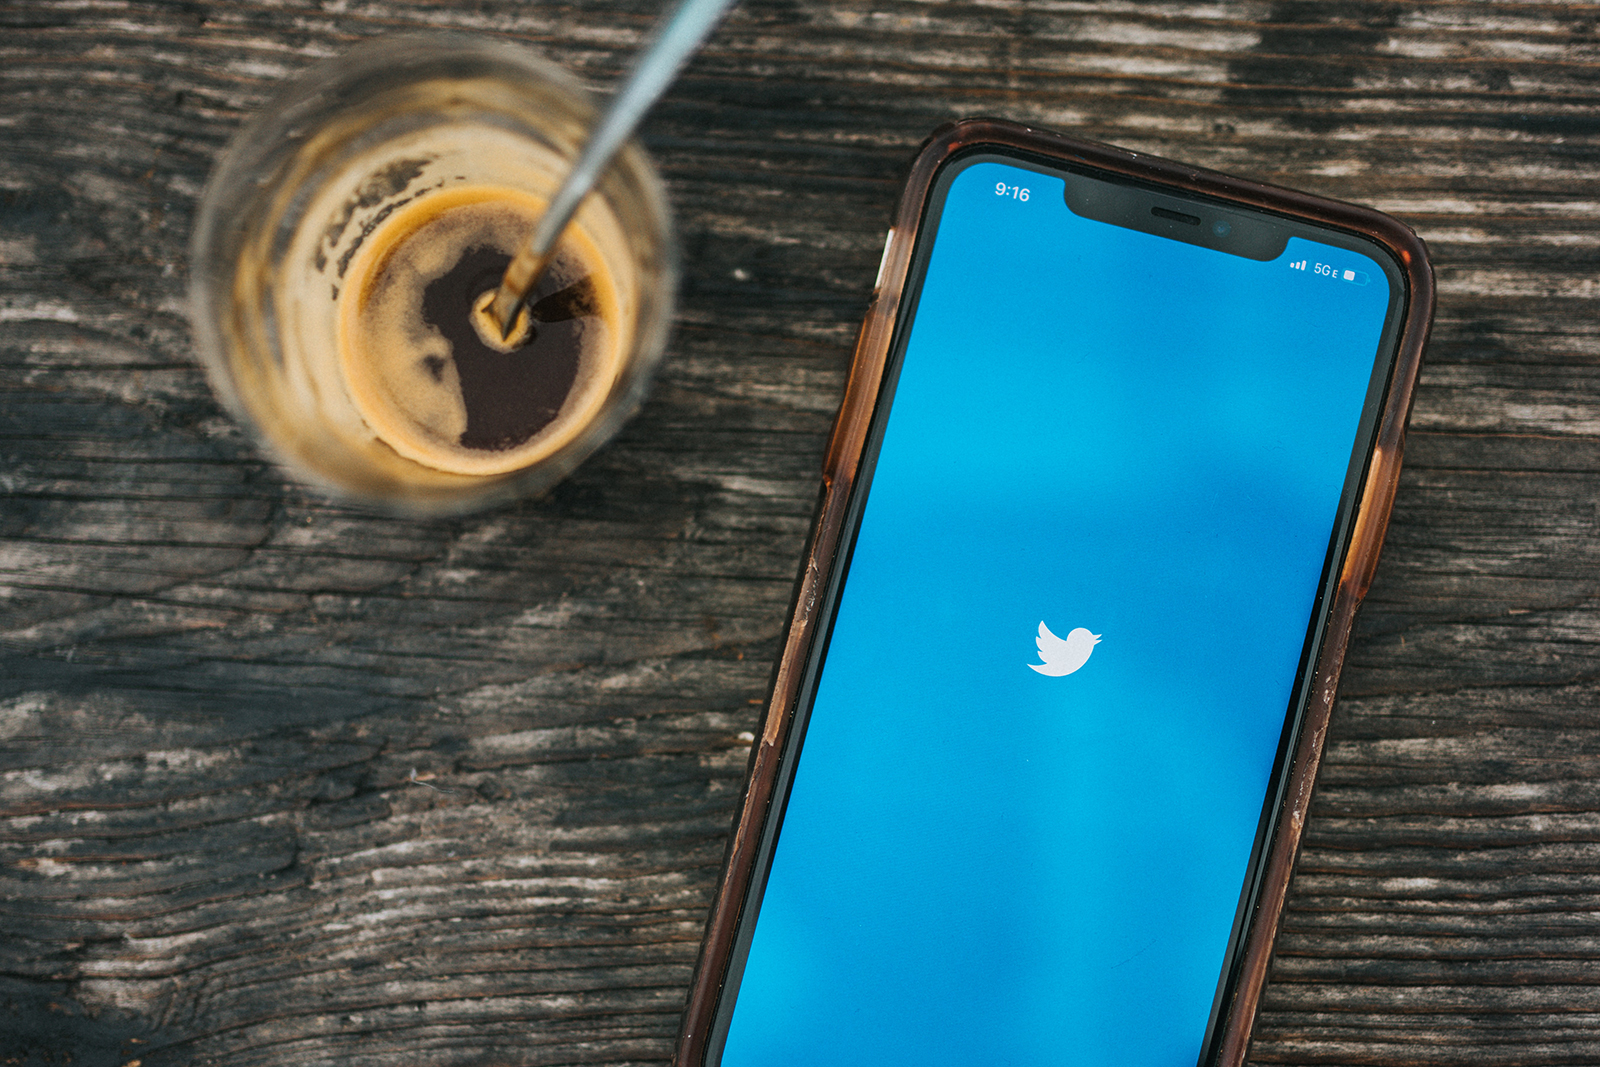 Twitter’s subscription provider would possibly worth $3 monthly